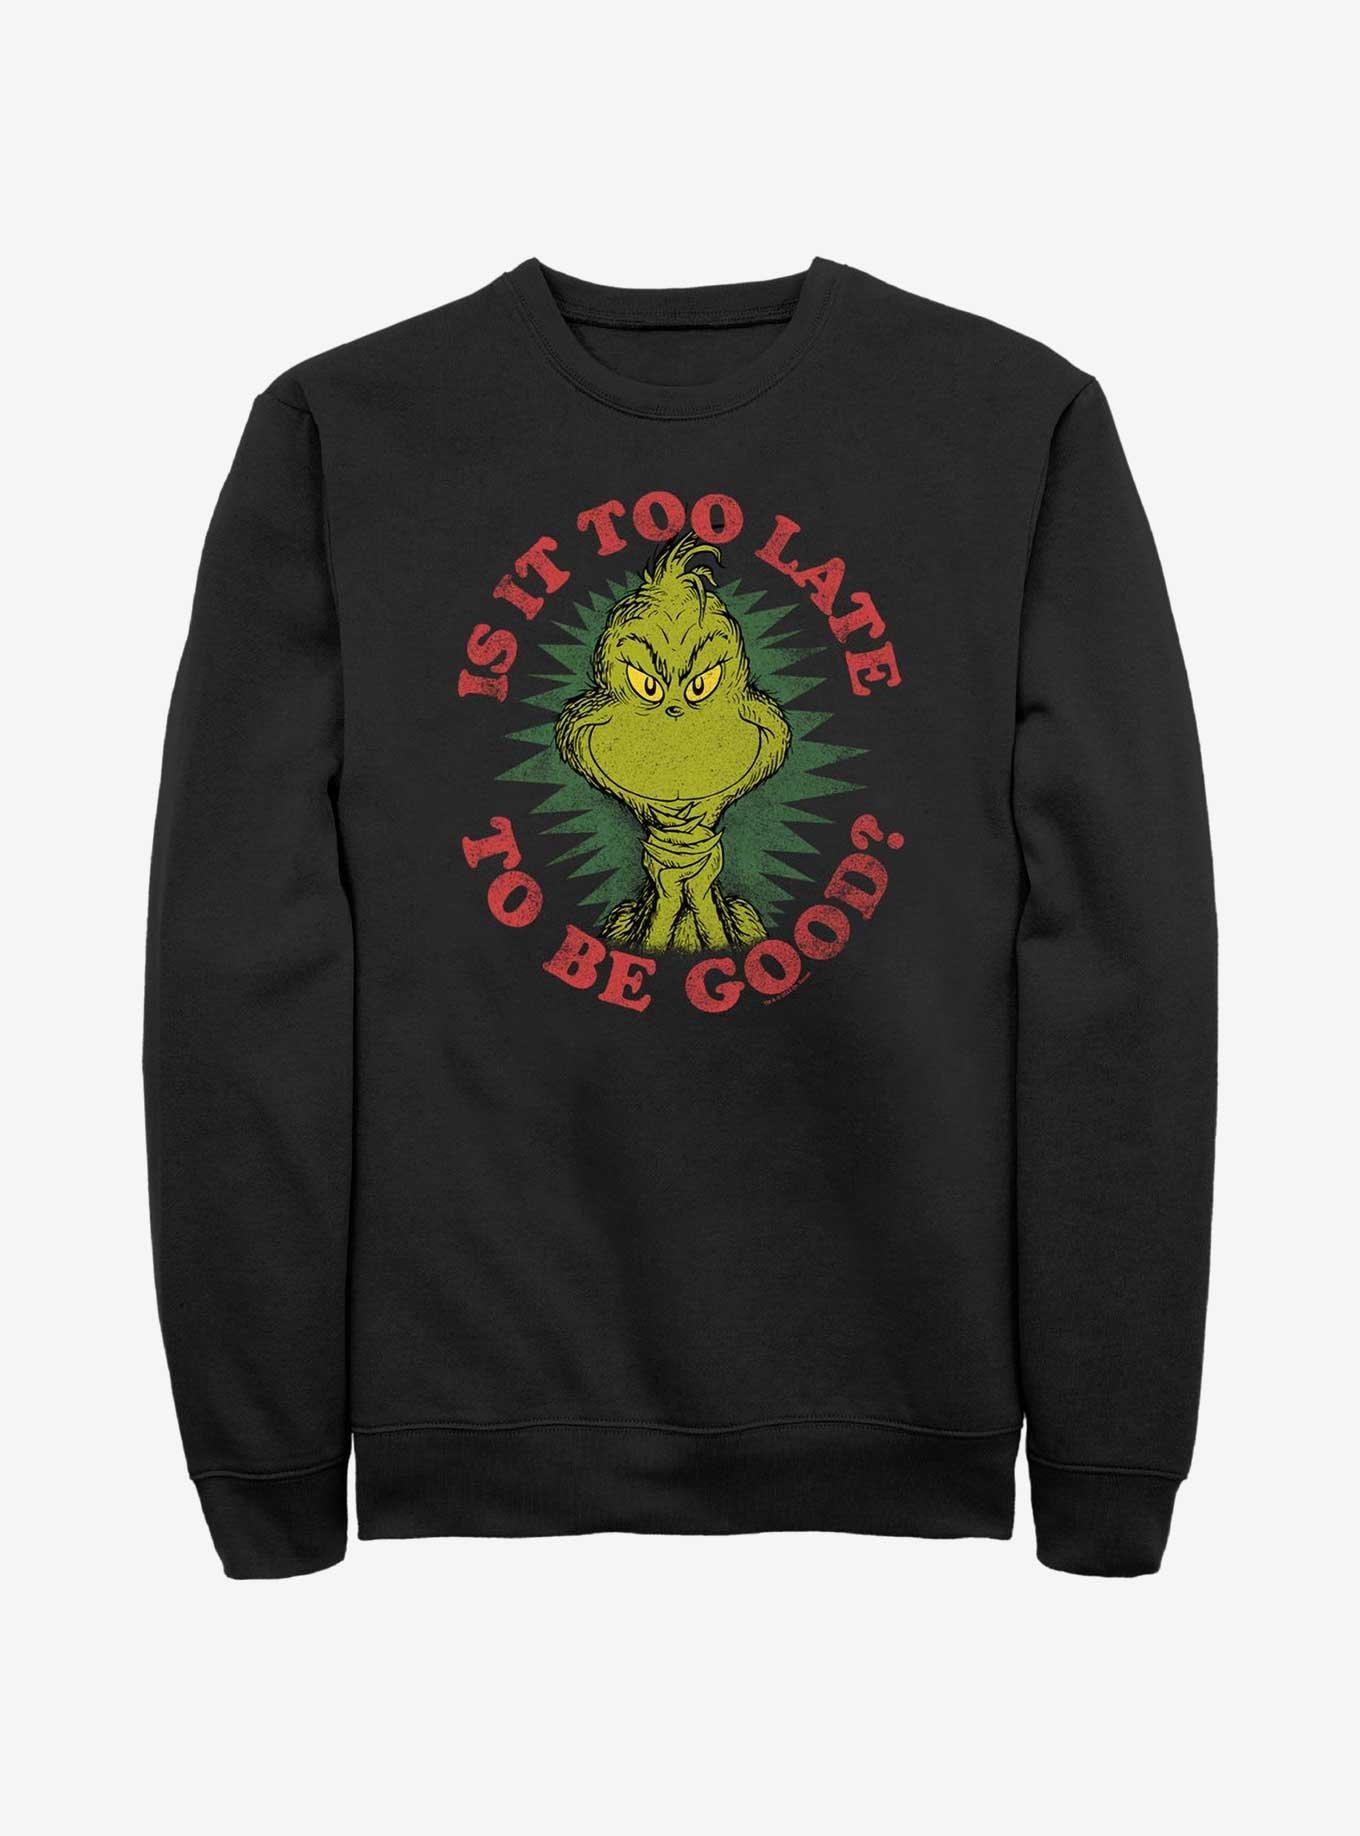 Dr. Seuss Grinch Is It Too Late To Be Good Sweatshirt, BLACK, hi-res